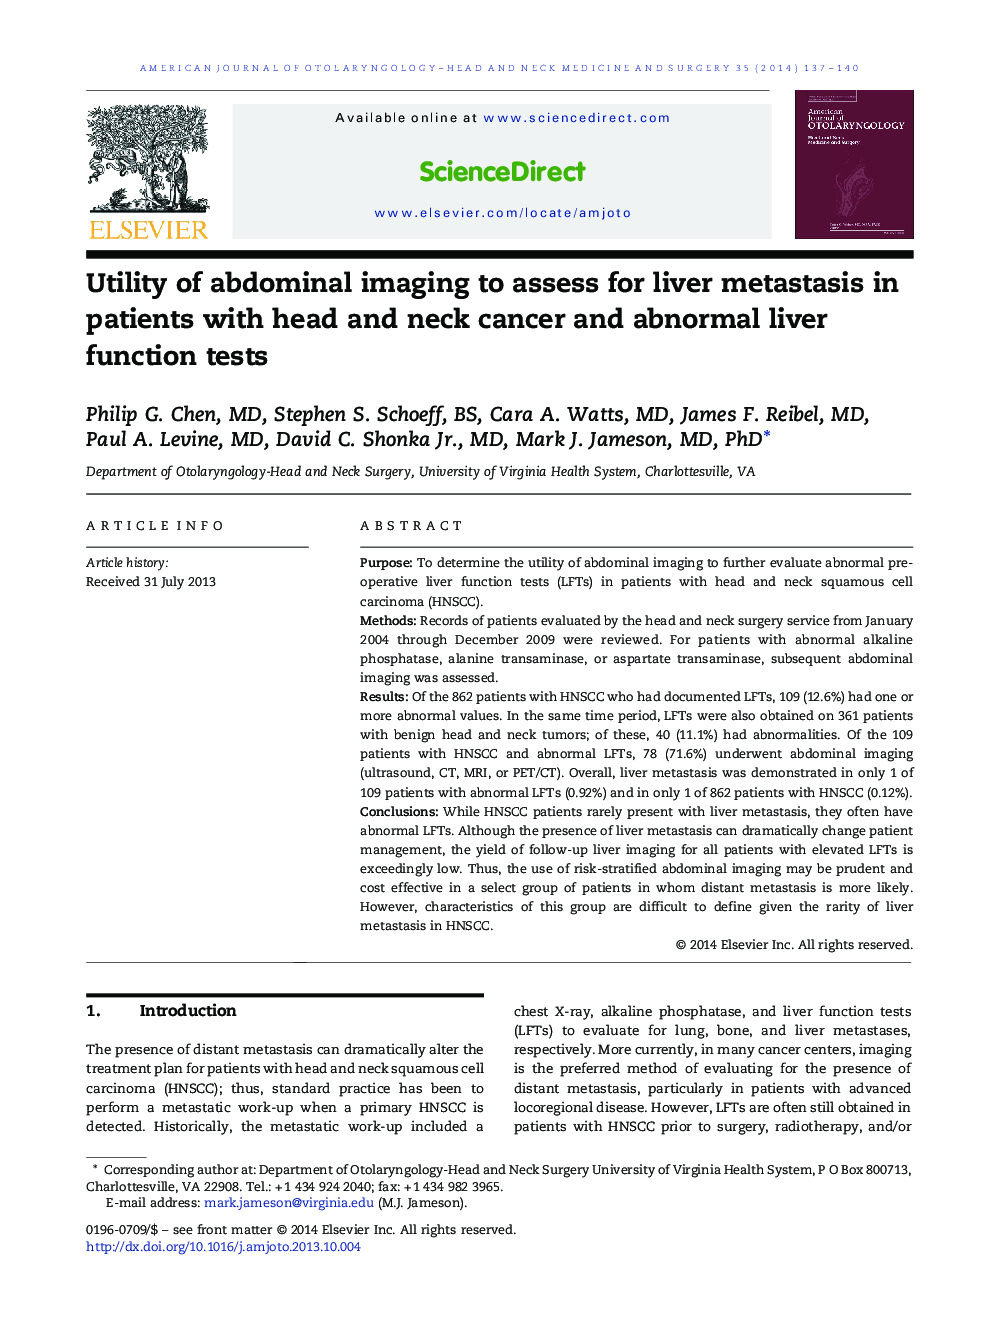 Utility of abdominal imaging to assess for liver metastasis in patients with head and neck cancer and abnormal liver function tests